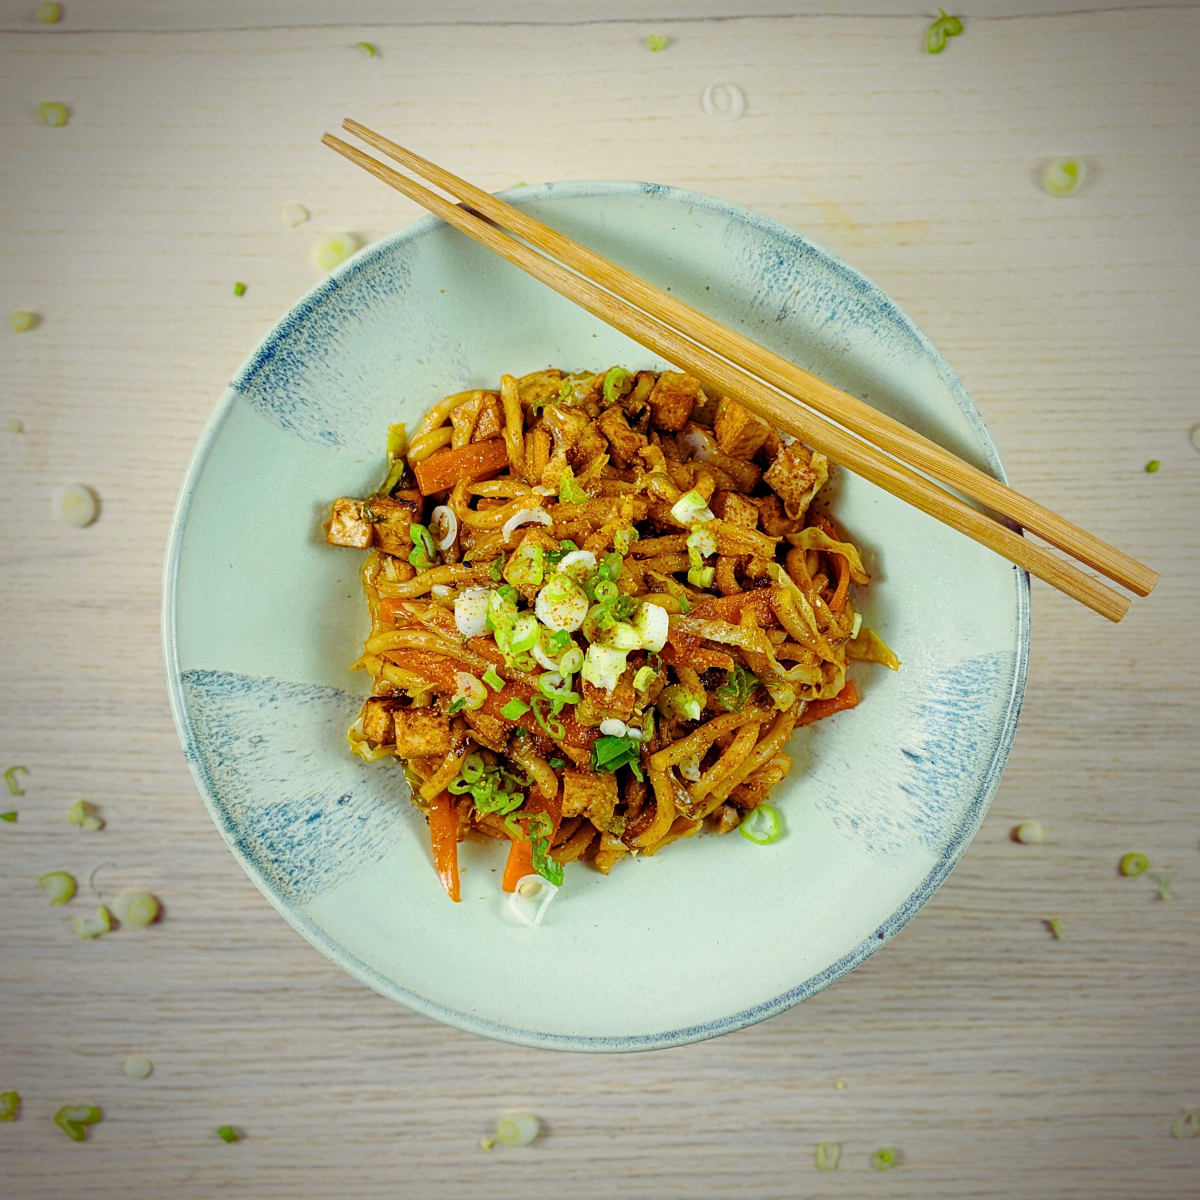 Bowl of cooked noodles with fried tofu, chopped carrots and spring onions on top, with a pair of chopsticks resting on the edge of the bowl.